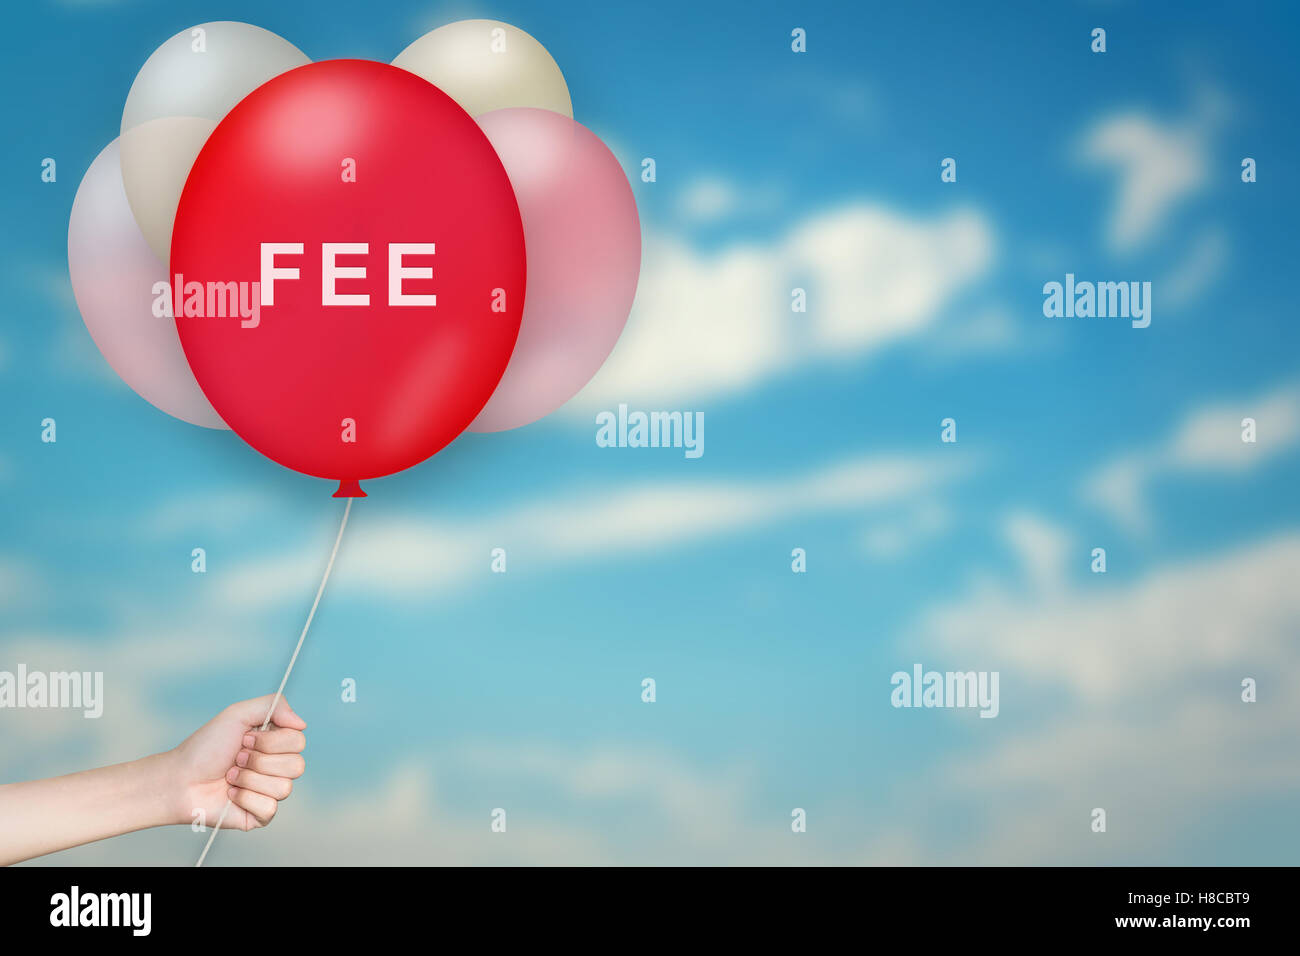 Hand Holding Fee Balloon with sky blurred background Stock Photo